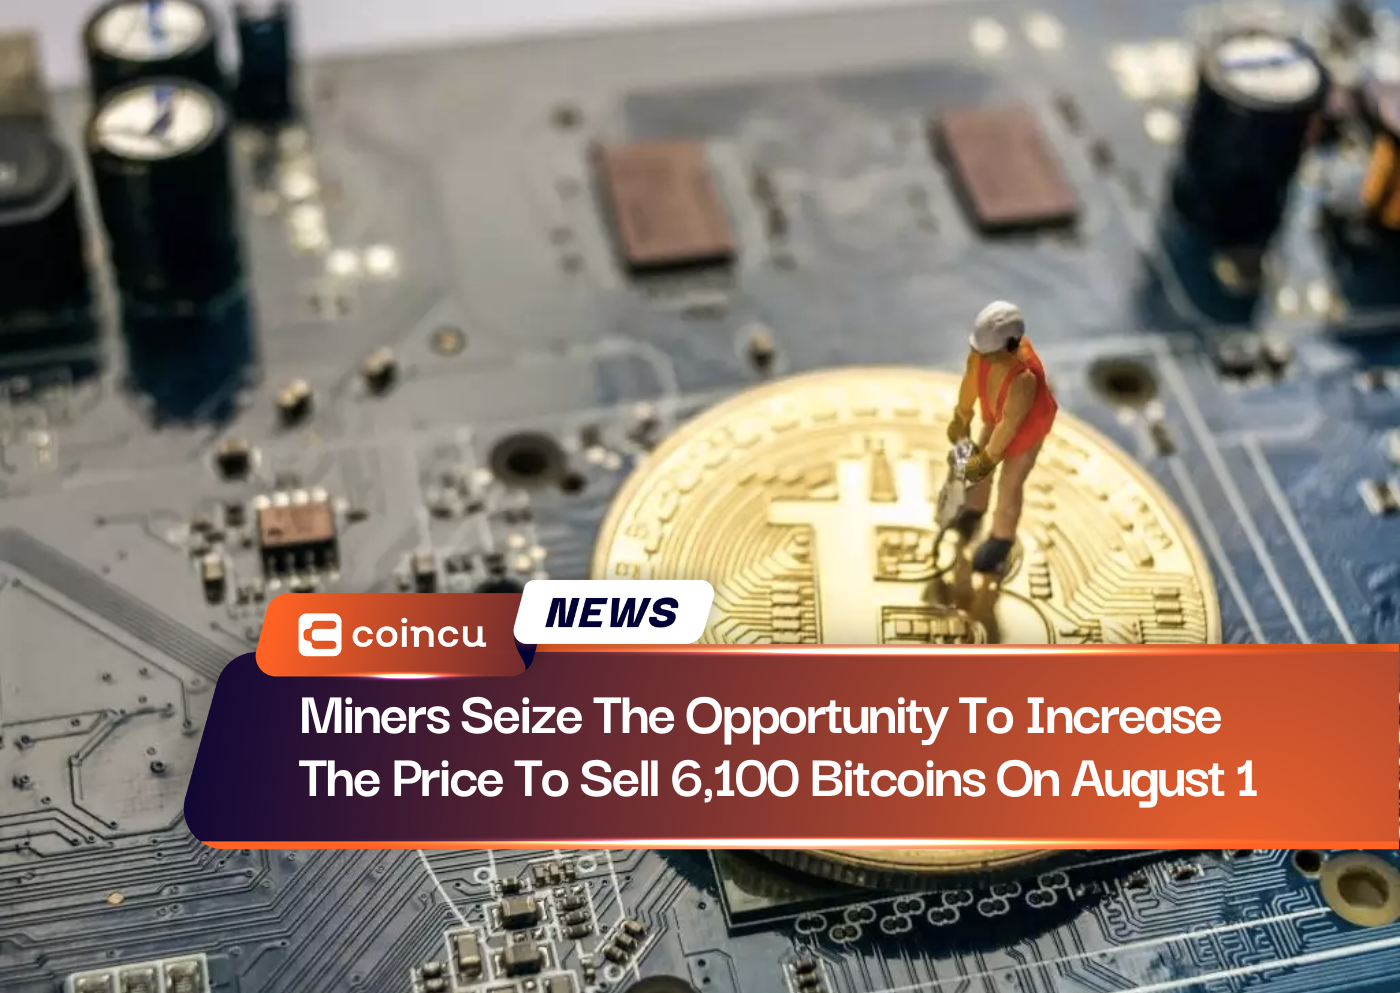 Miners Seize The Opportunity To Increase The Price To Sell 6,100 Bitcoins On August 1